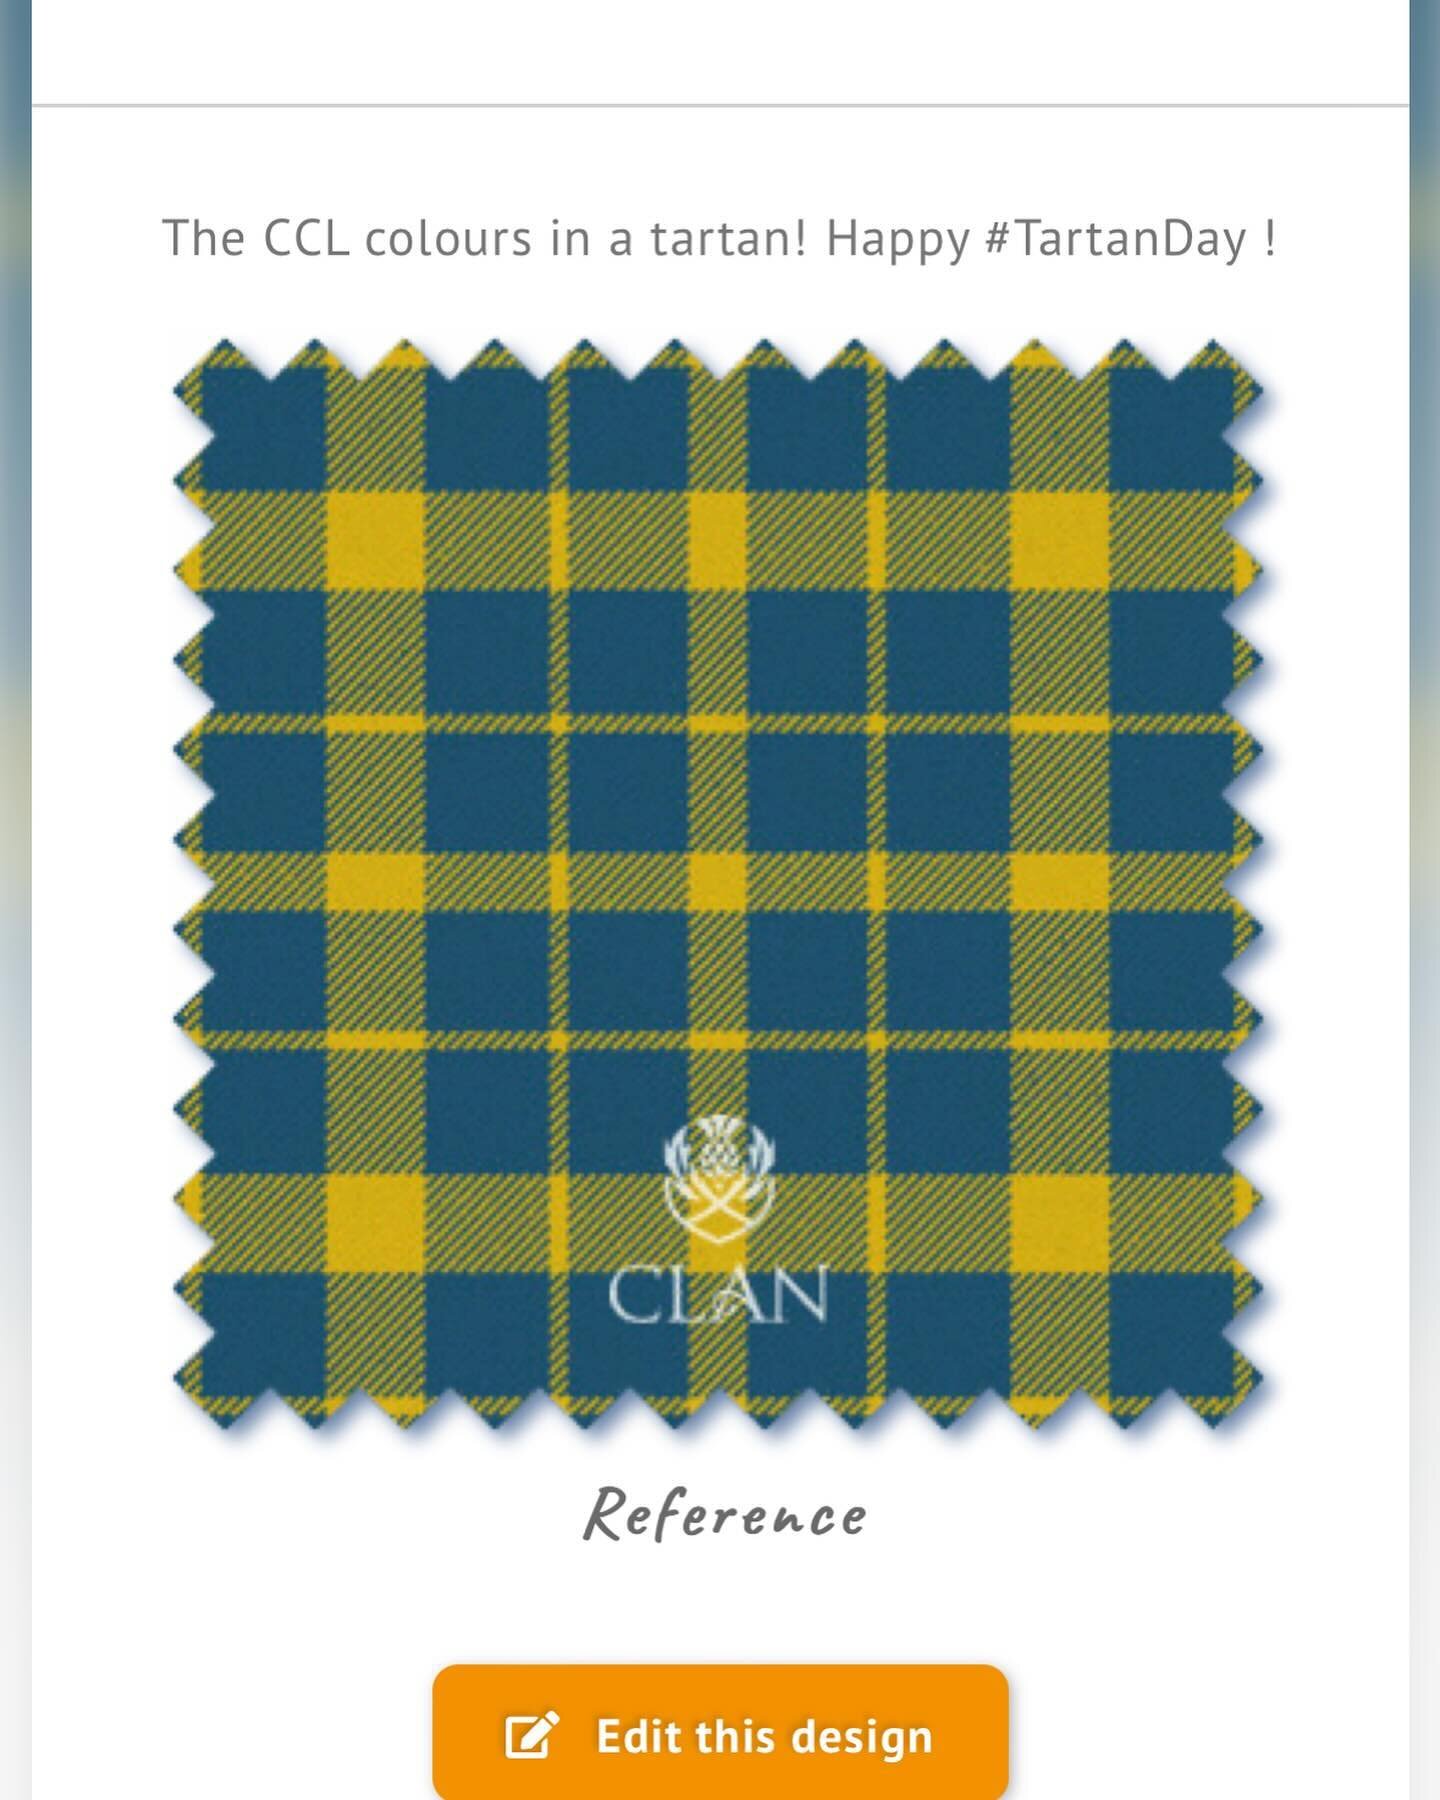 It&rsquo;s 🇺🇸 🇦🇺 #tartanday ! What&rsquo;s your #tartan ? Let&rsquo;s celebrate Scottish 🏴󠁧󠁢󠁳󠁣󠁴󠁿 heritage! Enjoy all things #scottish today! Wear a tartan, eat some #friedmarsbars and listen to some Scottish tunes 🎶! If you want to design